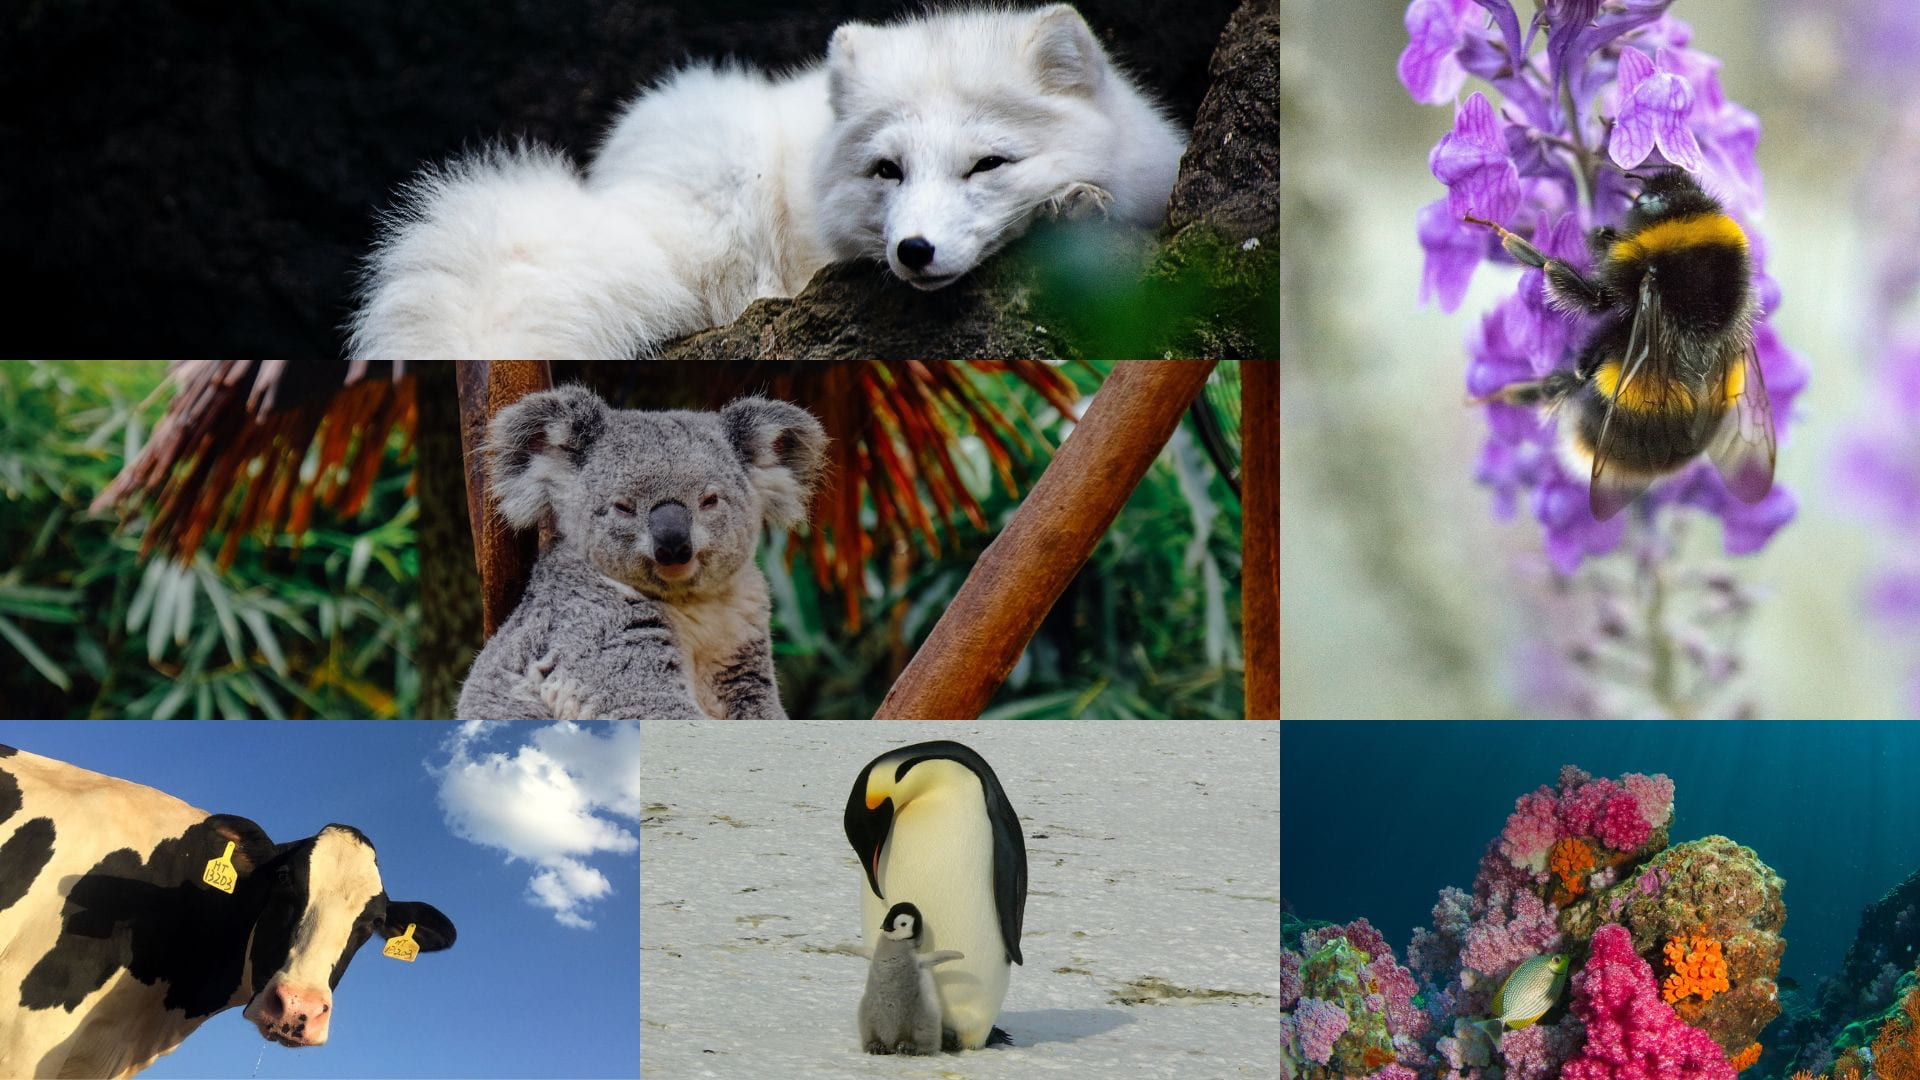 [A collage of endangered animals affected by climate change. In clockwise direction: an Arctic fox (©Teresa on Unsplash), a bumblebee (©Stacie Clark on Unsplash), coral reefs (©Milos Prelevic on Unsplash), an emperor penguin and its baby (©Memorycatcher on Pixabay), a cow (©Ryan Song on Unsplash), and a koala (©Ellicia on Unsplash). Collage by Hayeon Byun).